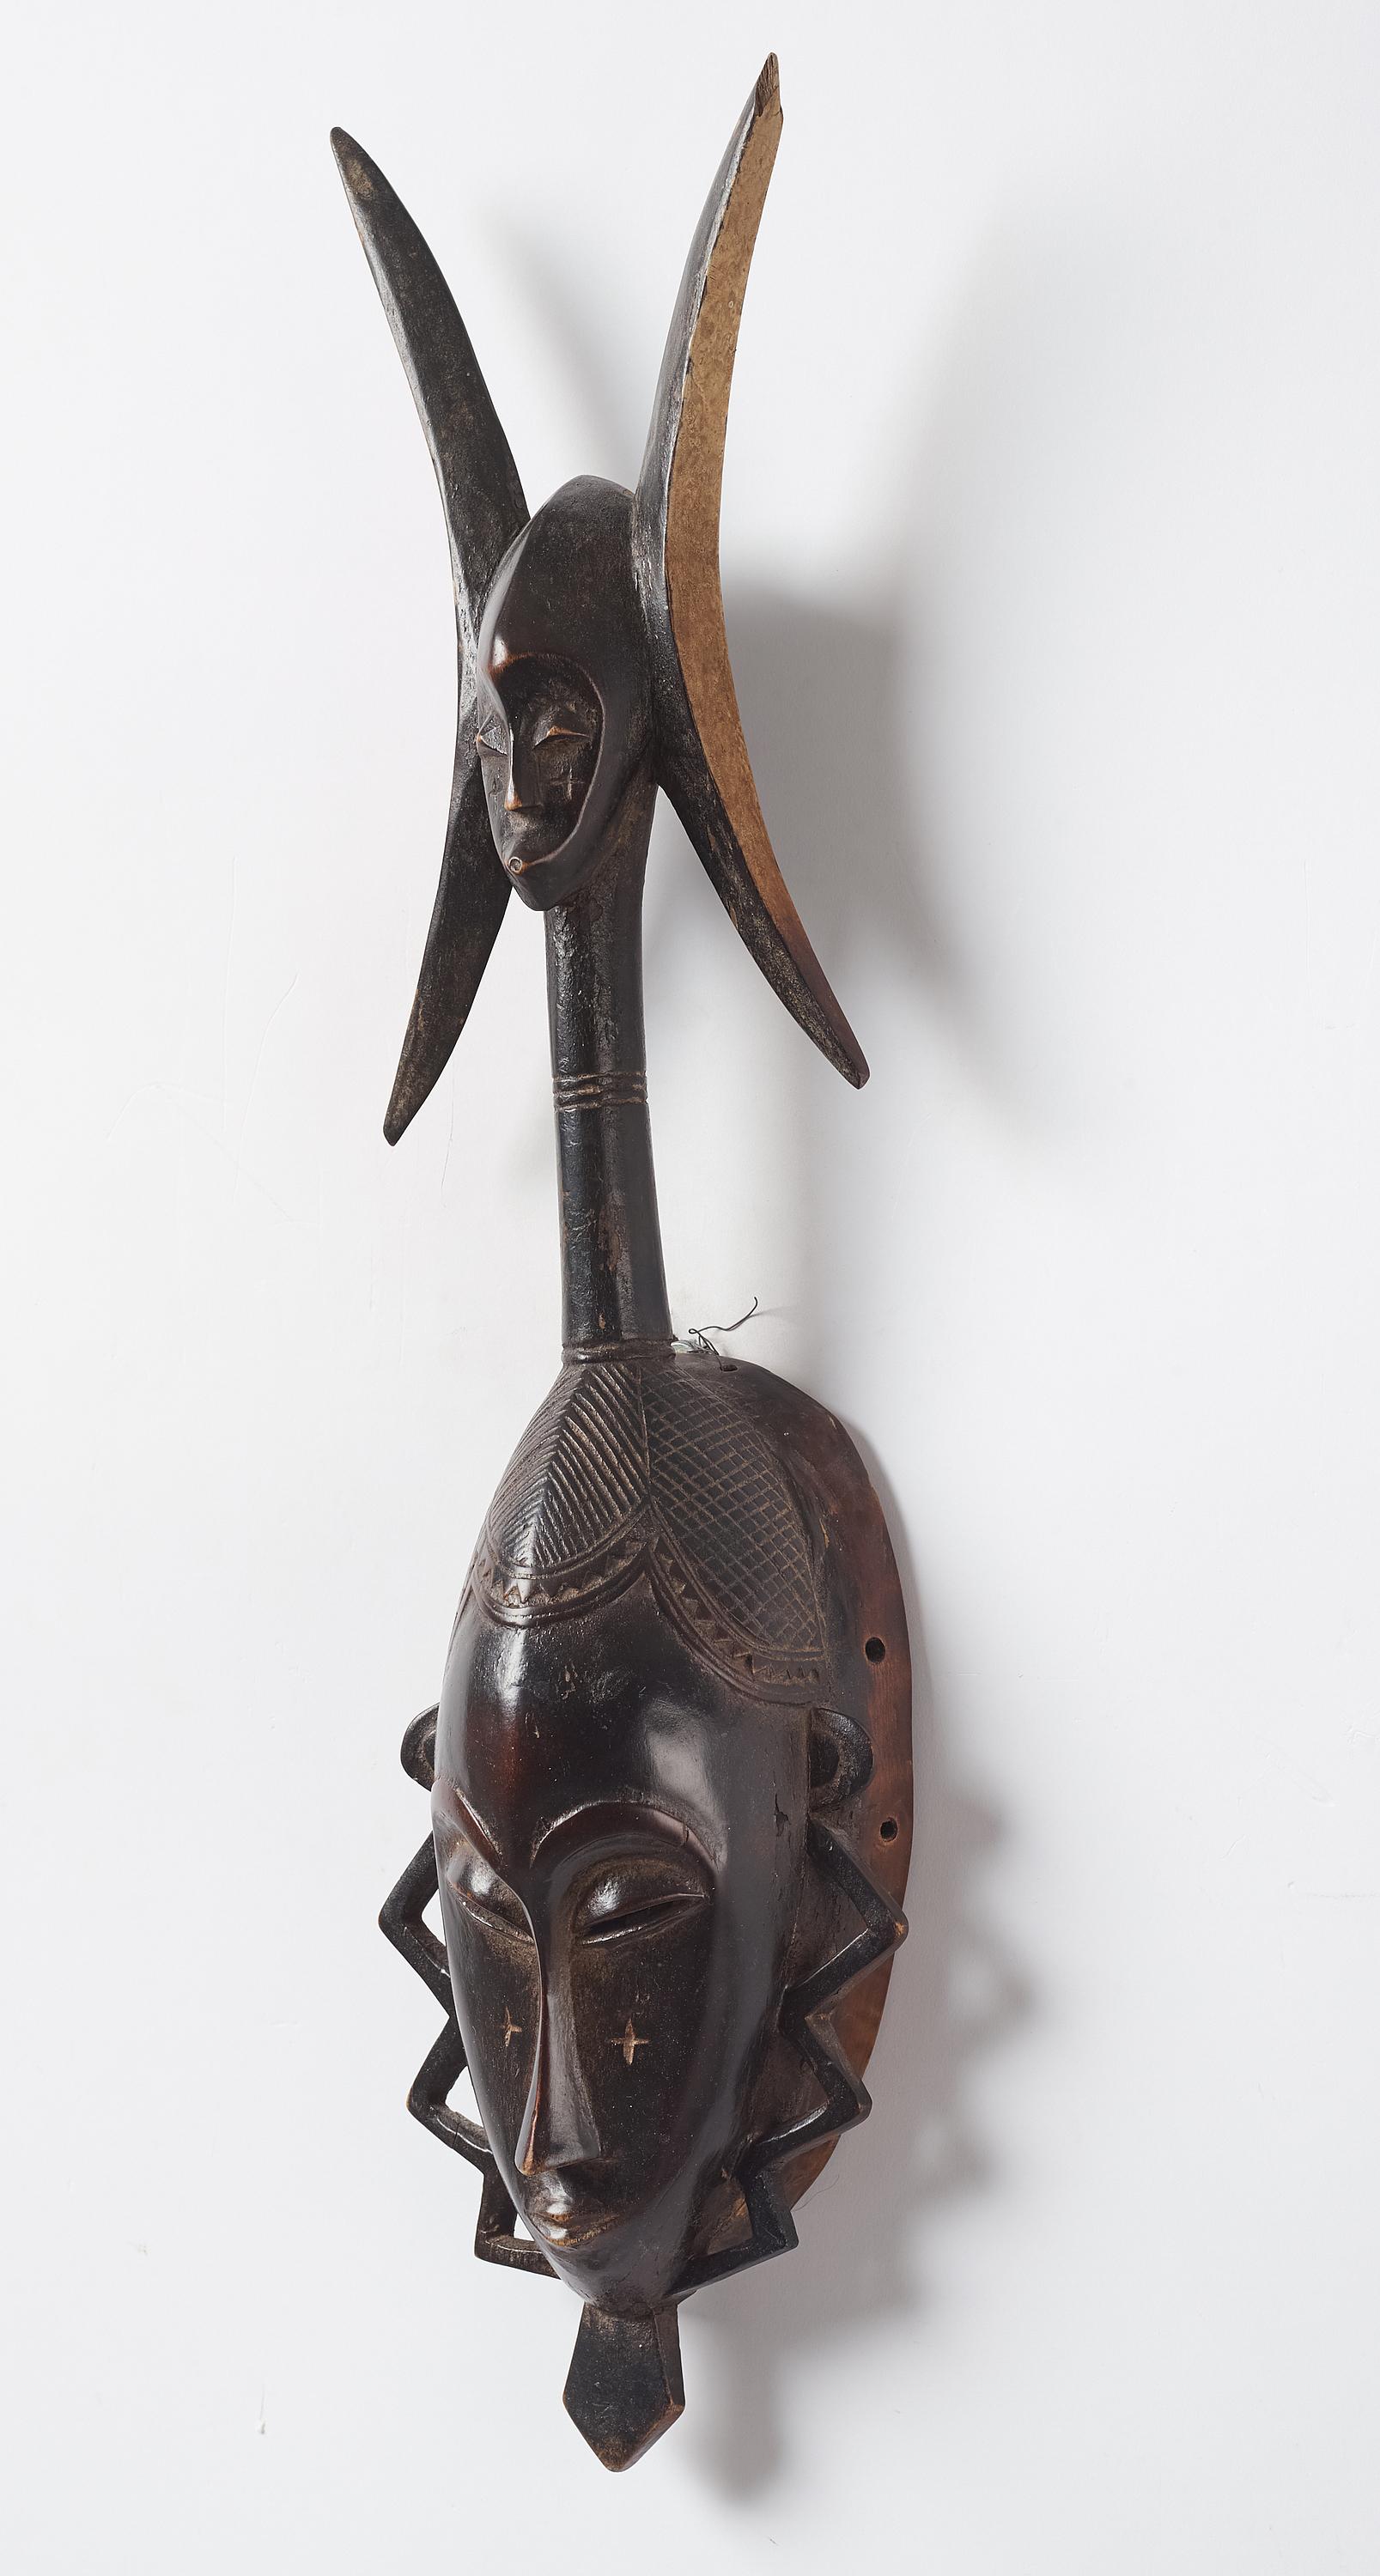 African mask from Yaure  tribe in Ivory Coast Circa 1950. Beautiful dark patina.
Swedish private collection, from the 1980s then inherited within the family.
Yaure tribe art is renowned for its delicacy and refinement. This superb mask is